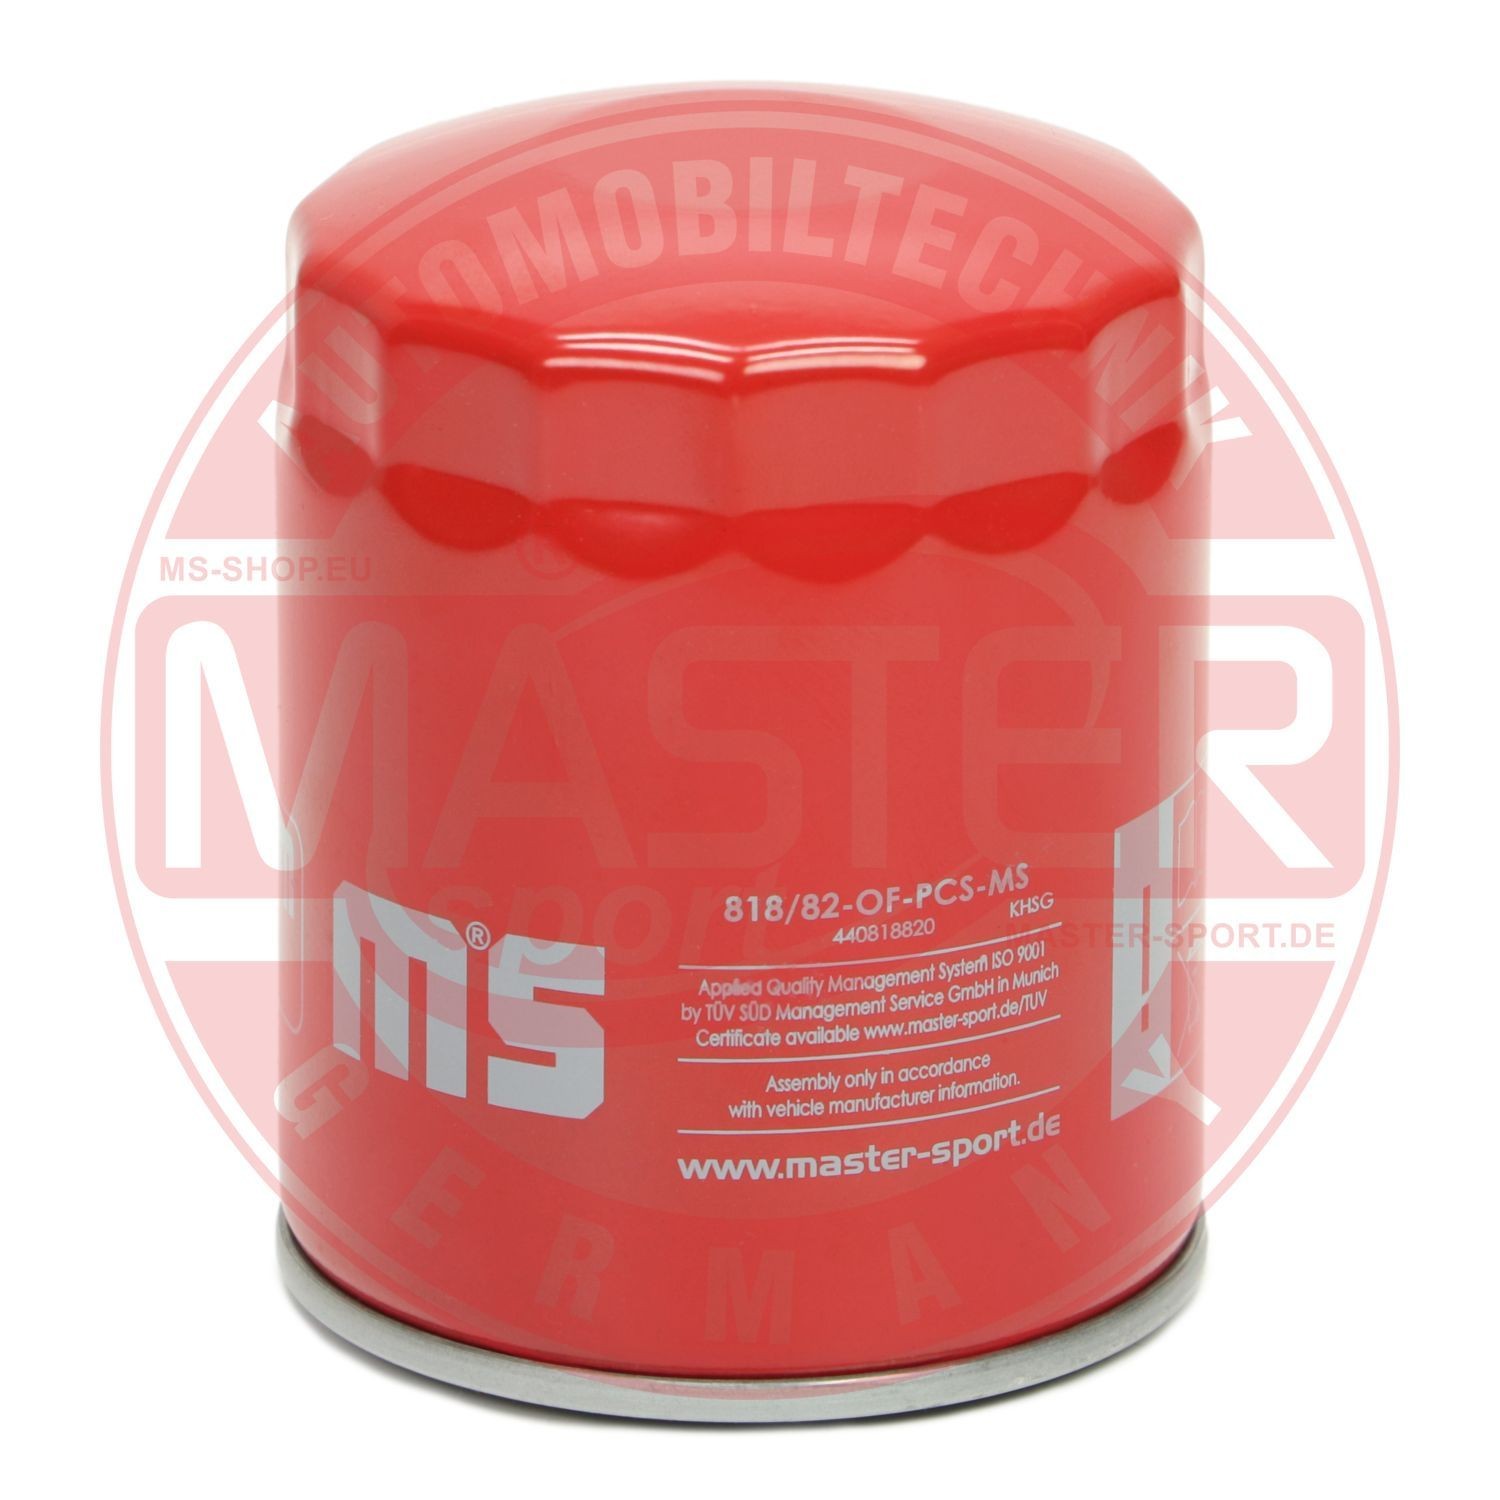 Oil filters MASTER-SPORT 3/4-16 UNF, with one anti-return valve, Filter Insert - 818/82-OF-PCS-MS